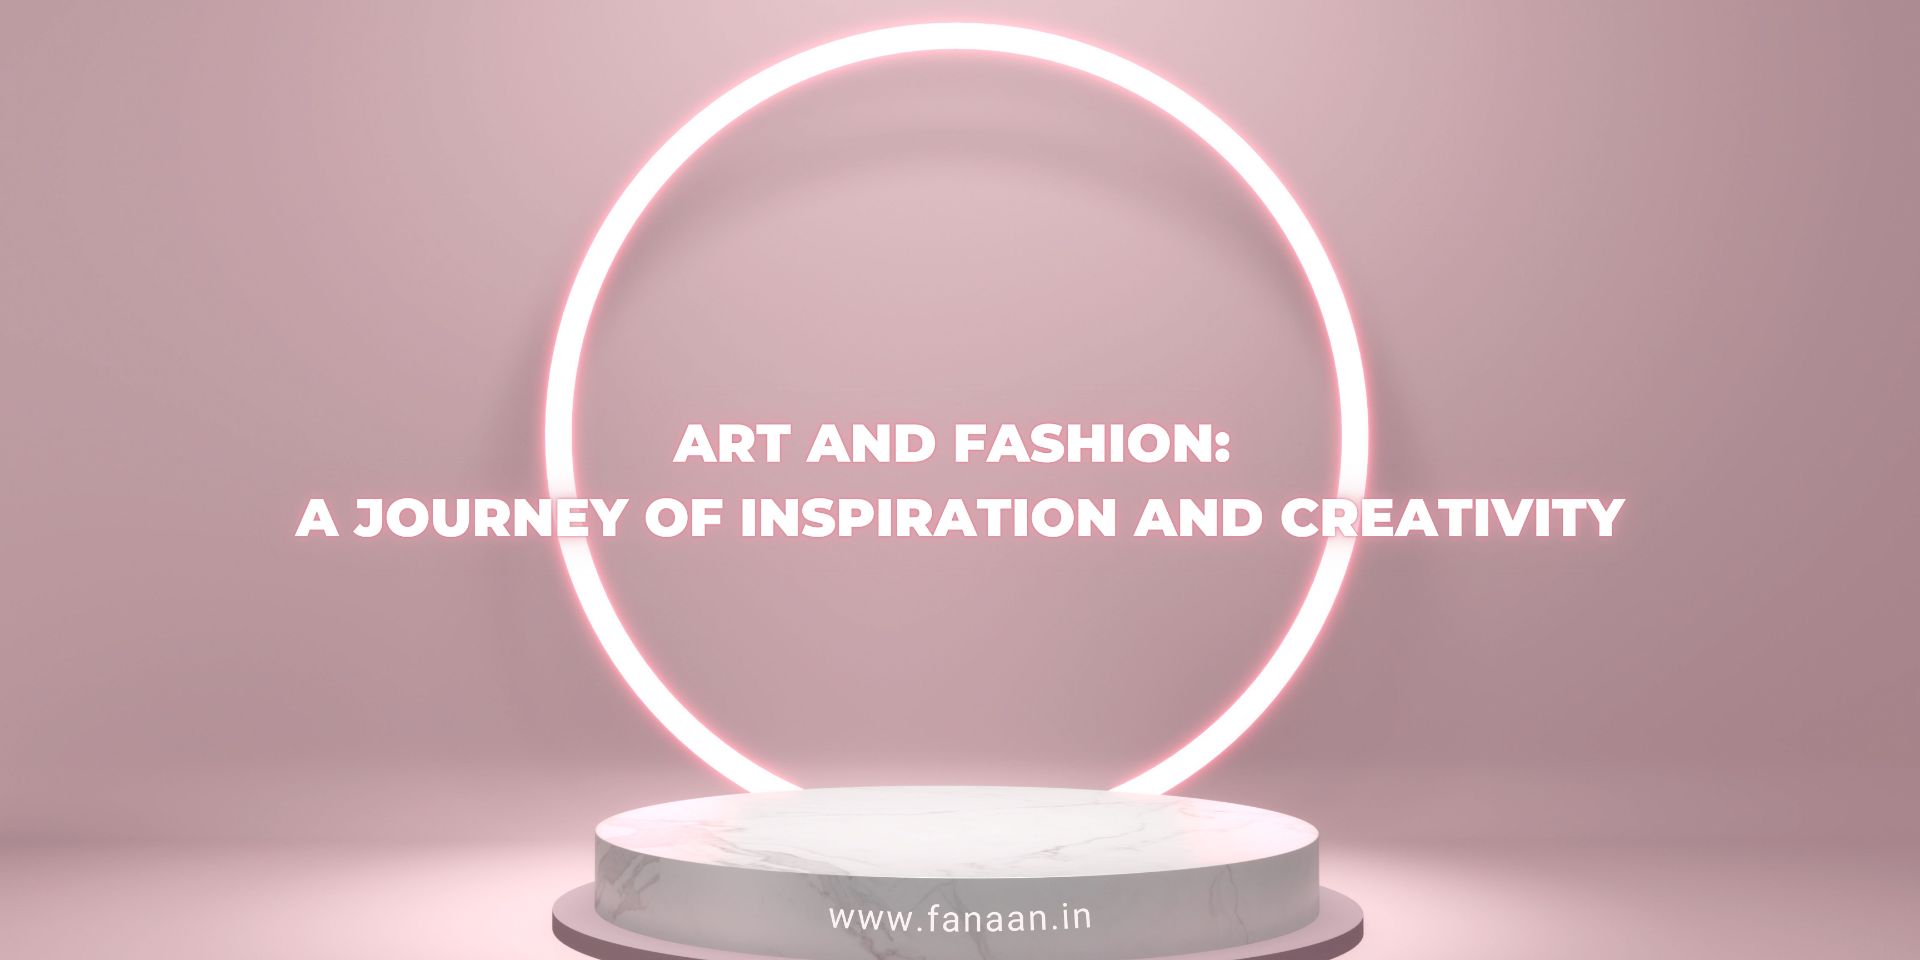 ART AND FASHION: A JOURNEY OF INSPIRATION AND CREATIVITY